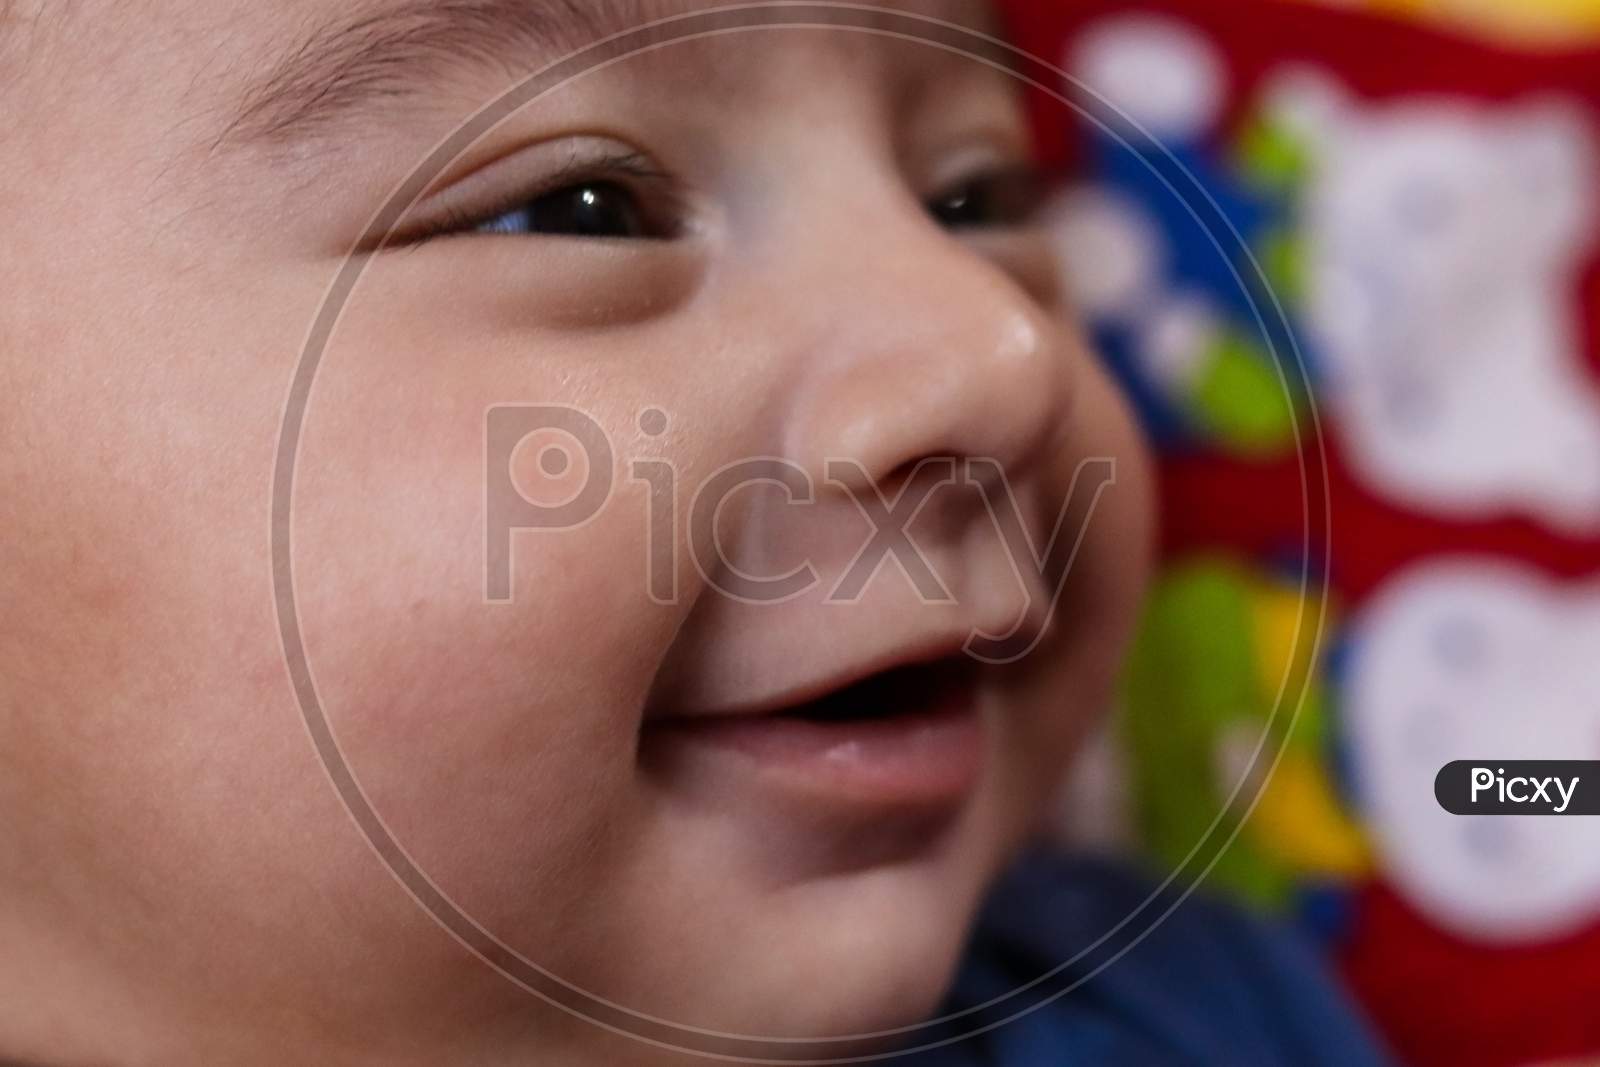 close up indian small baby boy